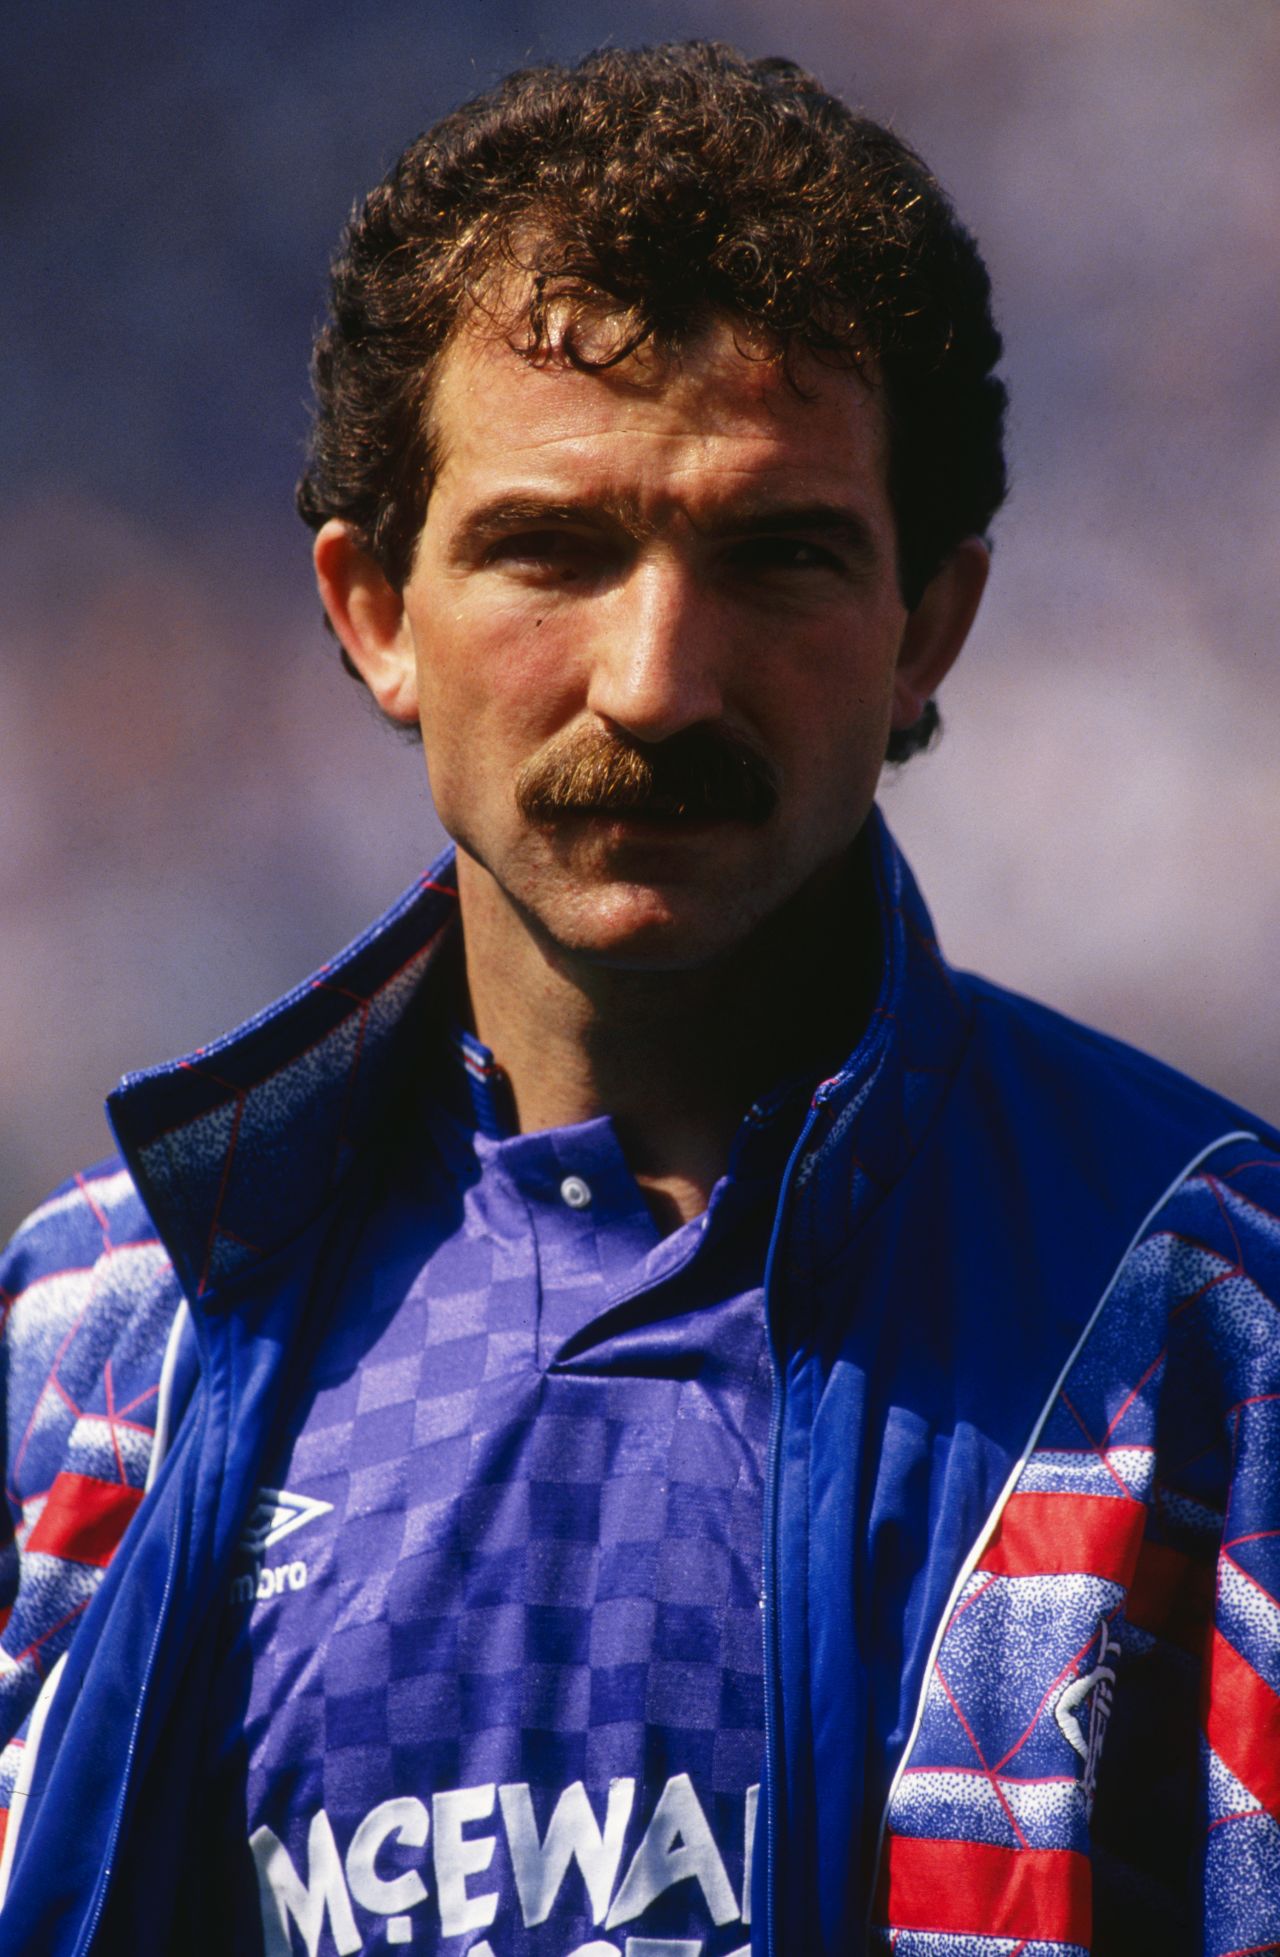 Graeme Souness is credited with triggering a Rangers revival in the late 1980s that led them to be dubbed the richest club in Britain. The former Liverpool player recruited a host of top English stars, success followed and crowds flocked to Ibrox.